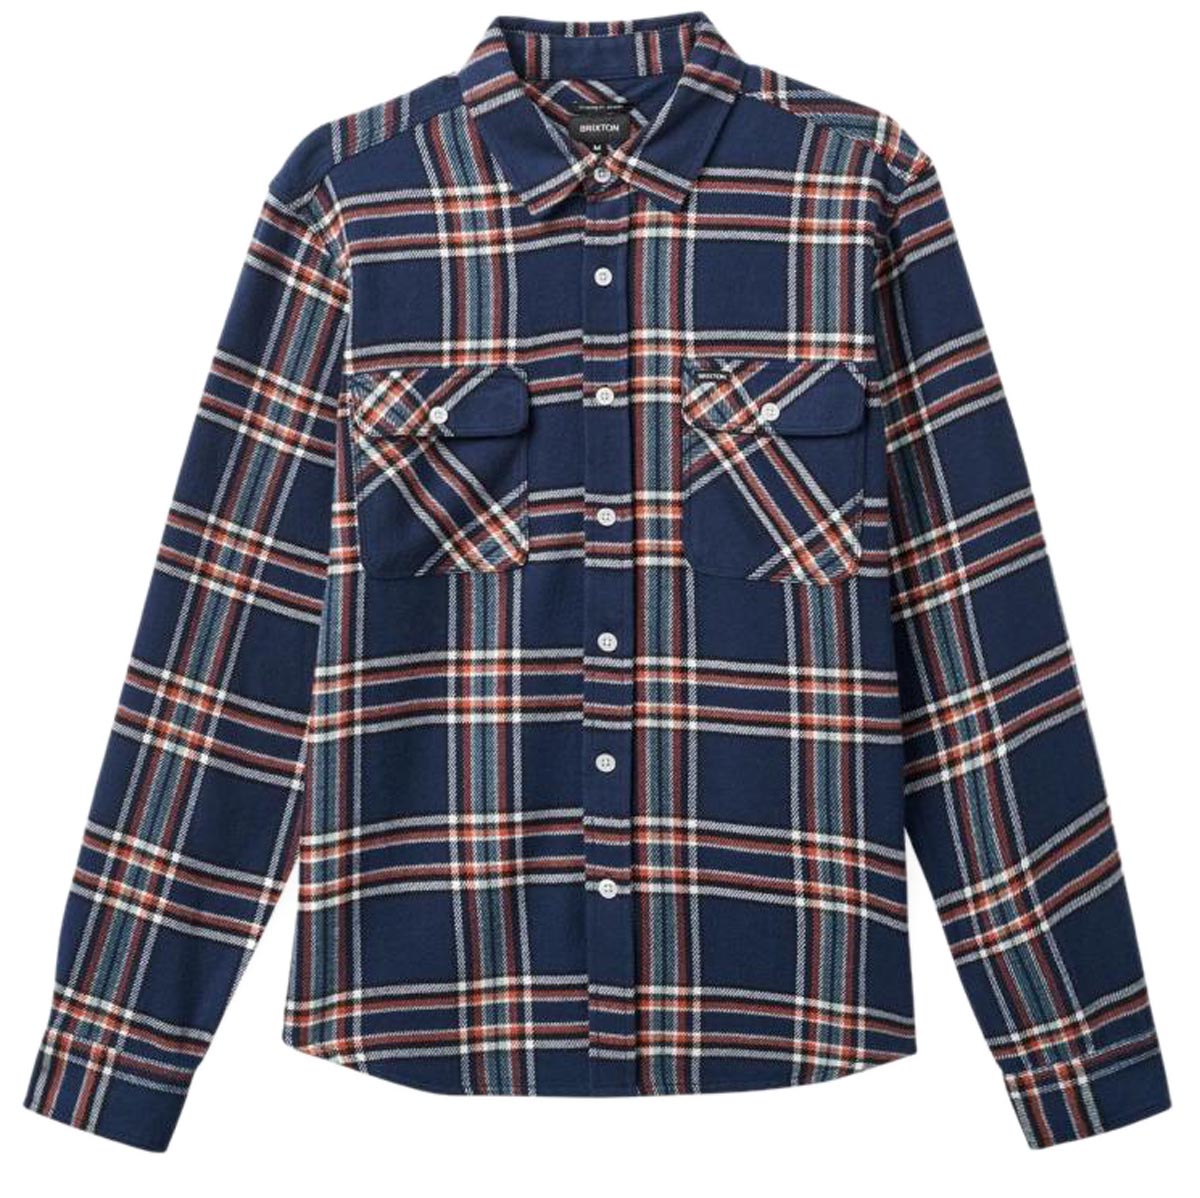 Brixton Bowery Flannel Long Sleeve Shirt - Washed Navy/Off White/Terracot image 3